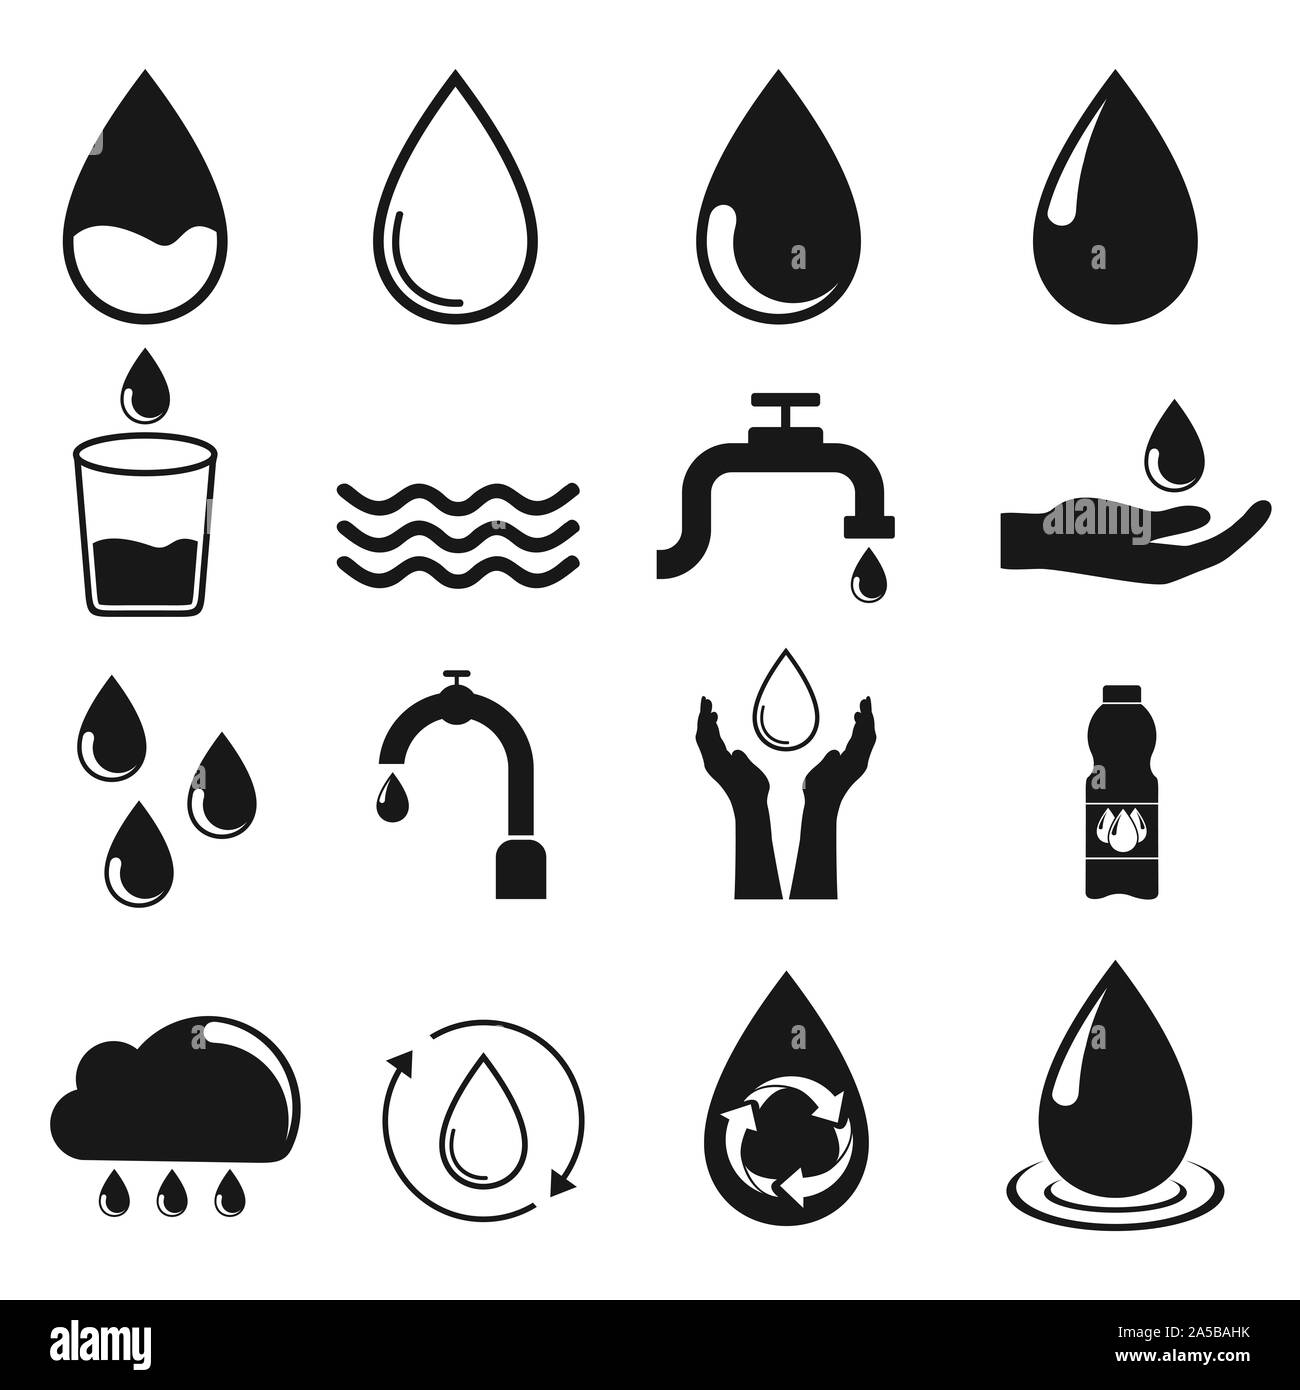 Water icons set isolated on white background. Black. such as water drop, treatment, sewage, recycle, fresh, save. Vector illustration Stock Photo